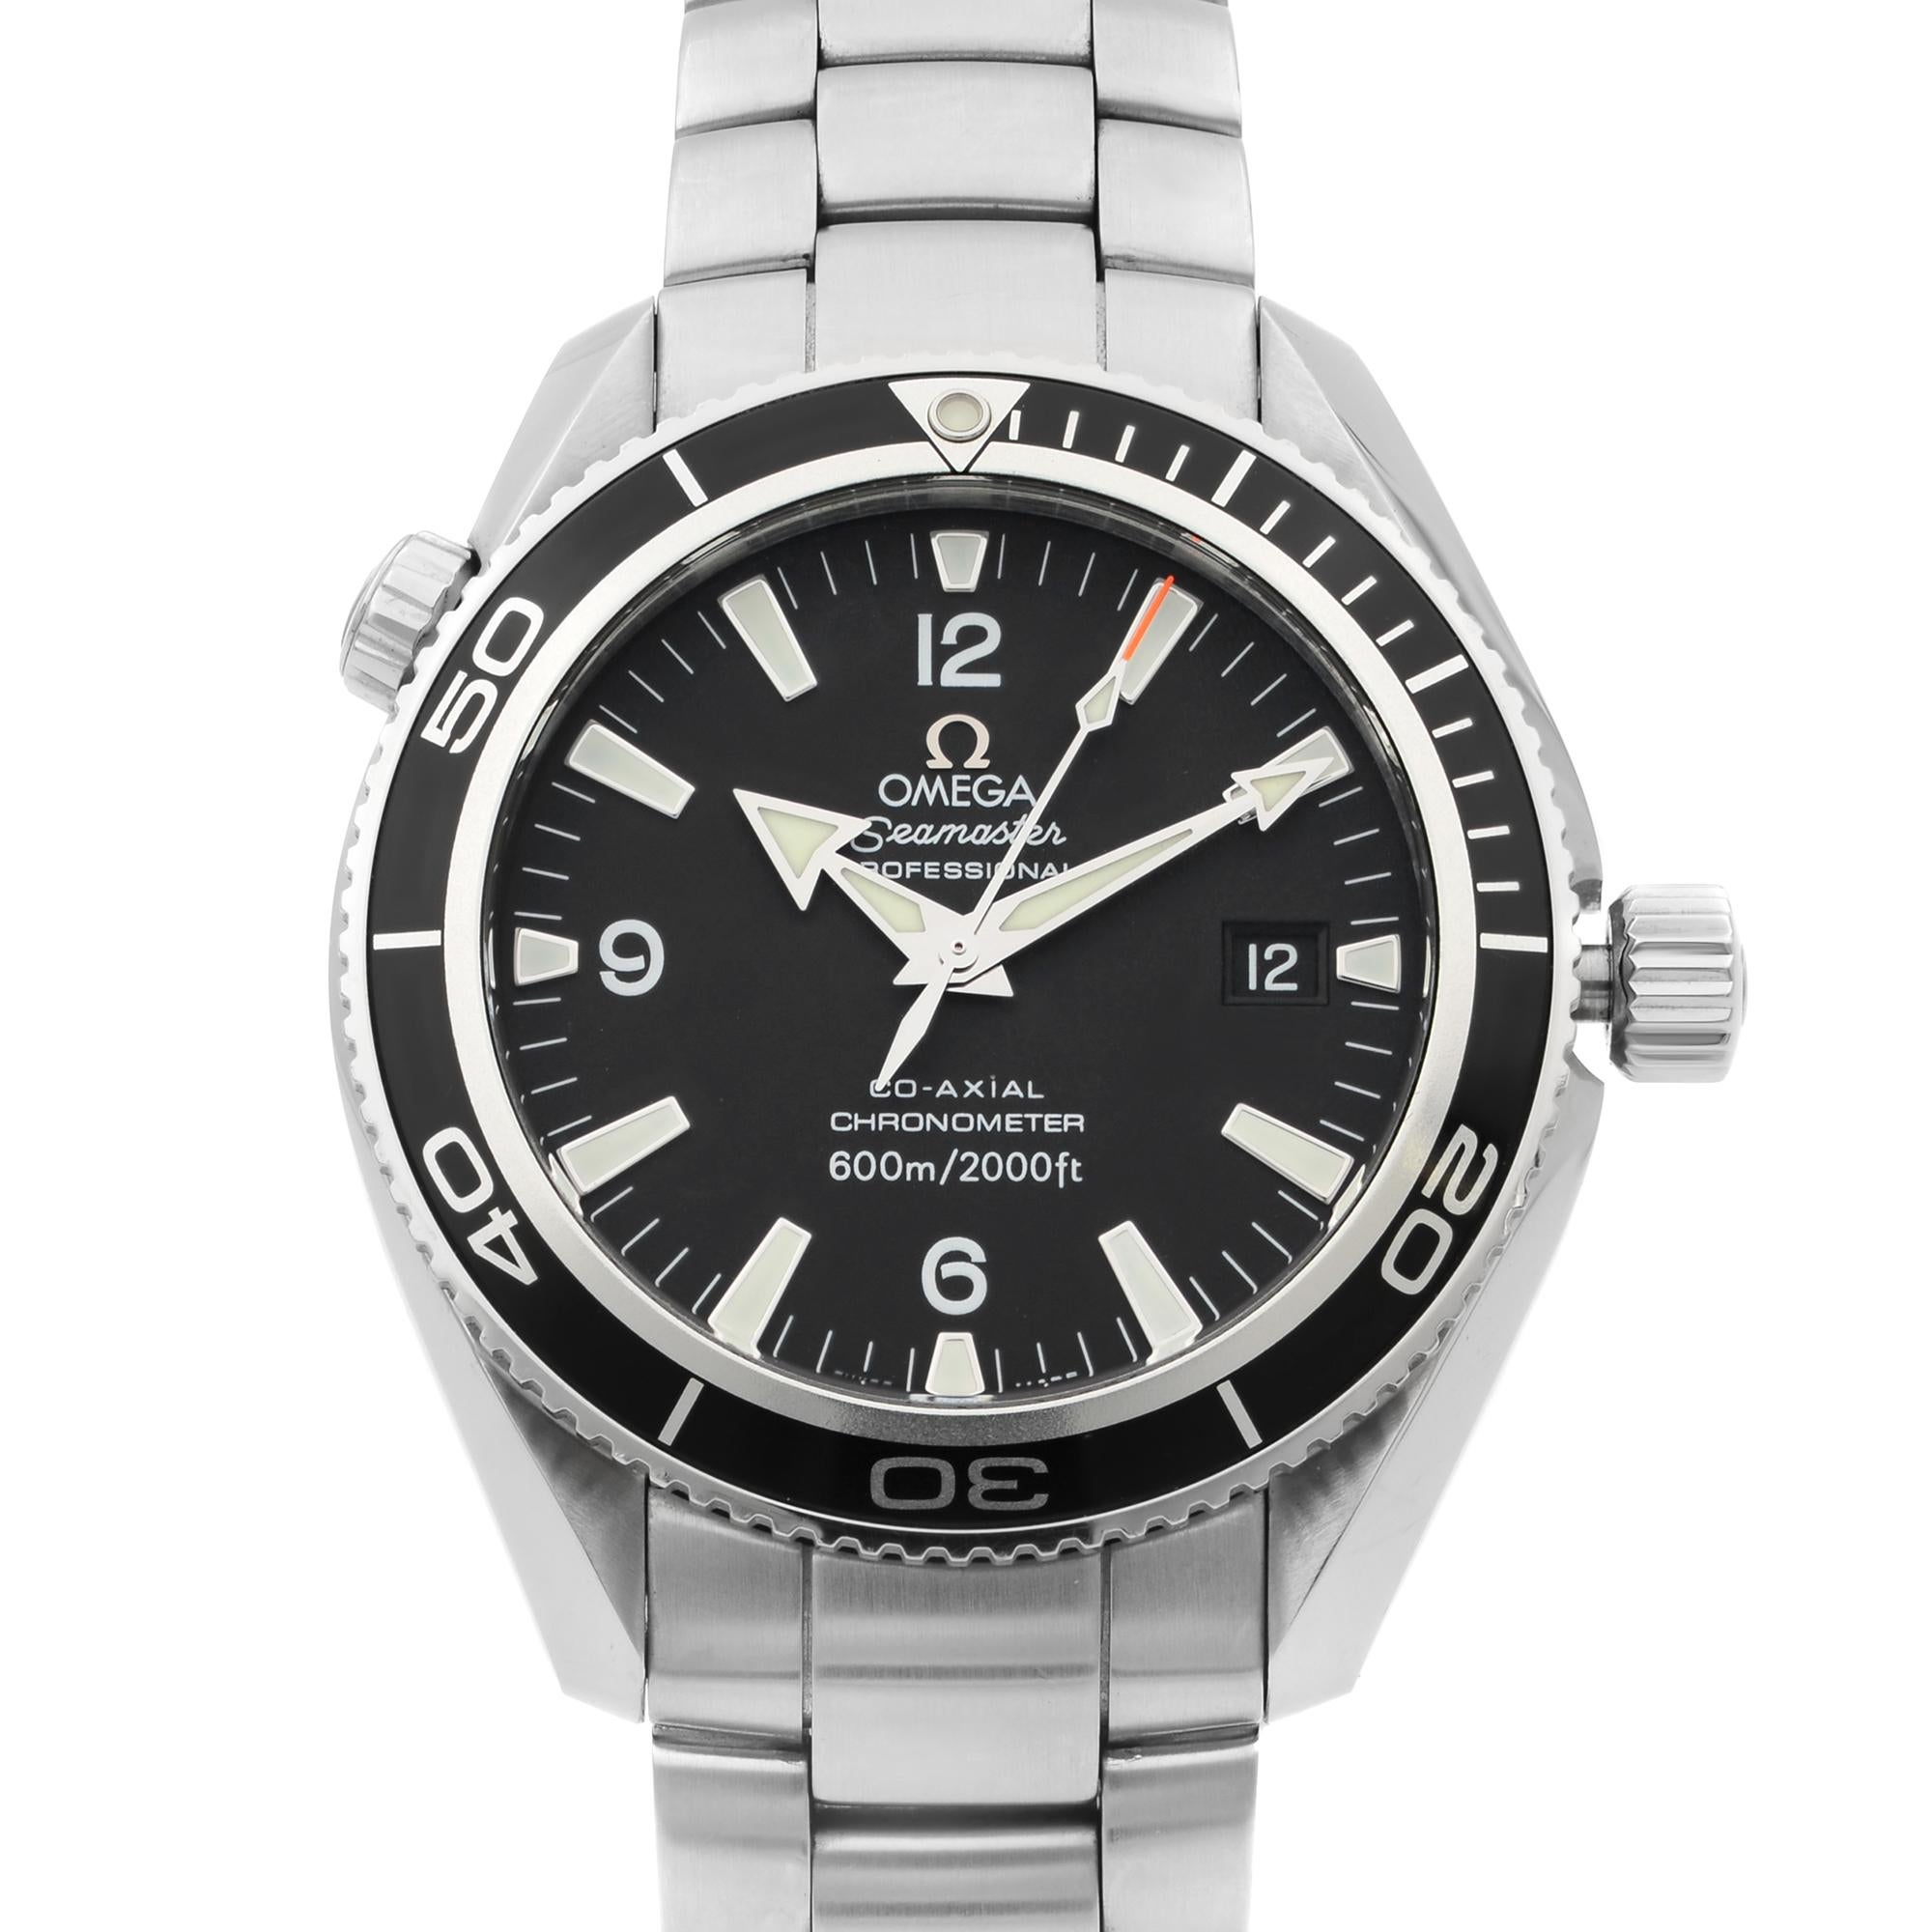 This pre-owned Omega Seamaster 2201.50.00  is a beautiful men's timepiece that is powered by a mechanical (automatic) movement which is cased in a stainless steel case. It has a round shape face, date indicator dial, and has hand sticks & numerals